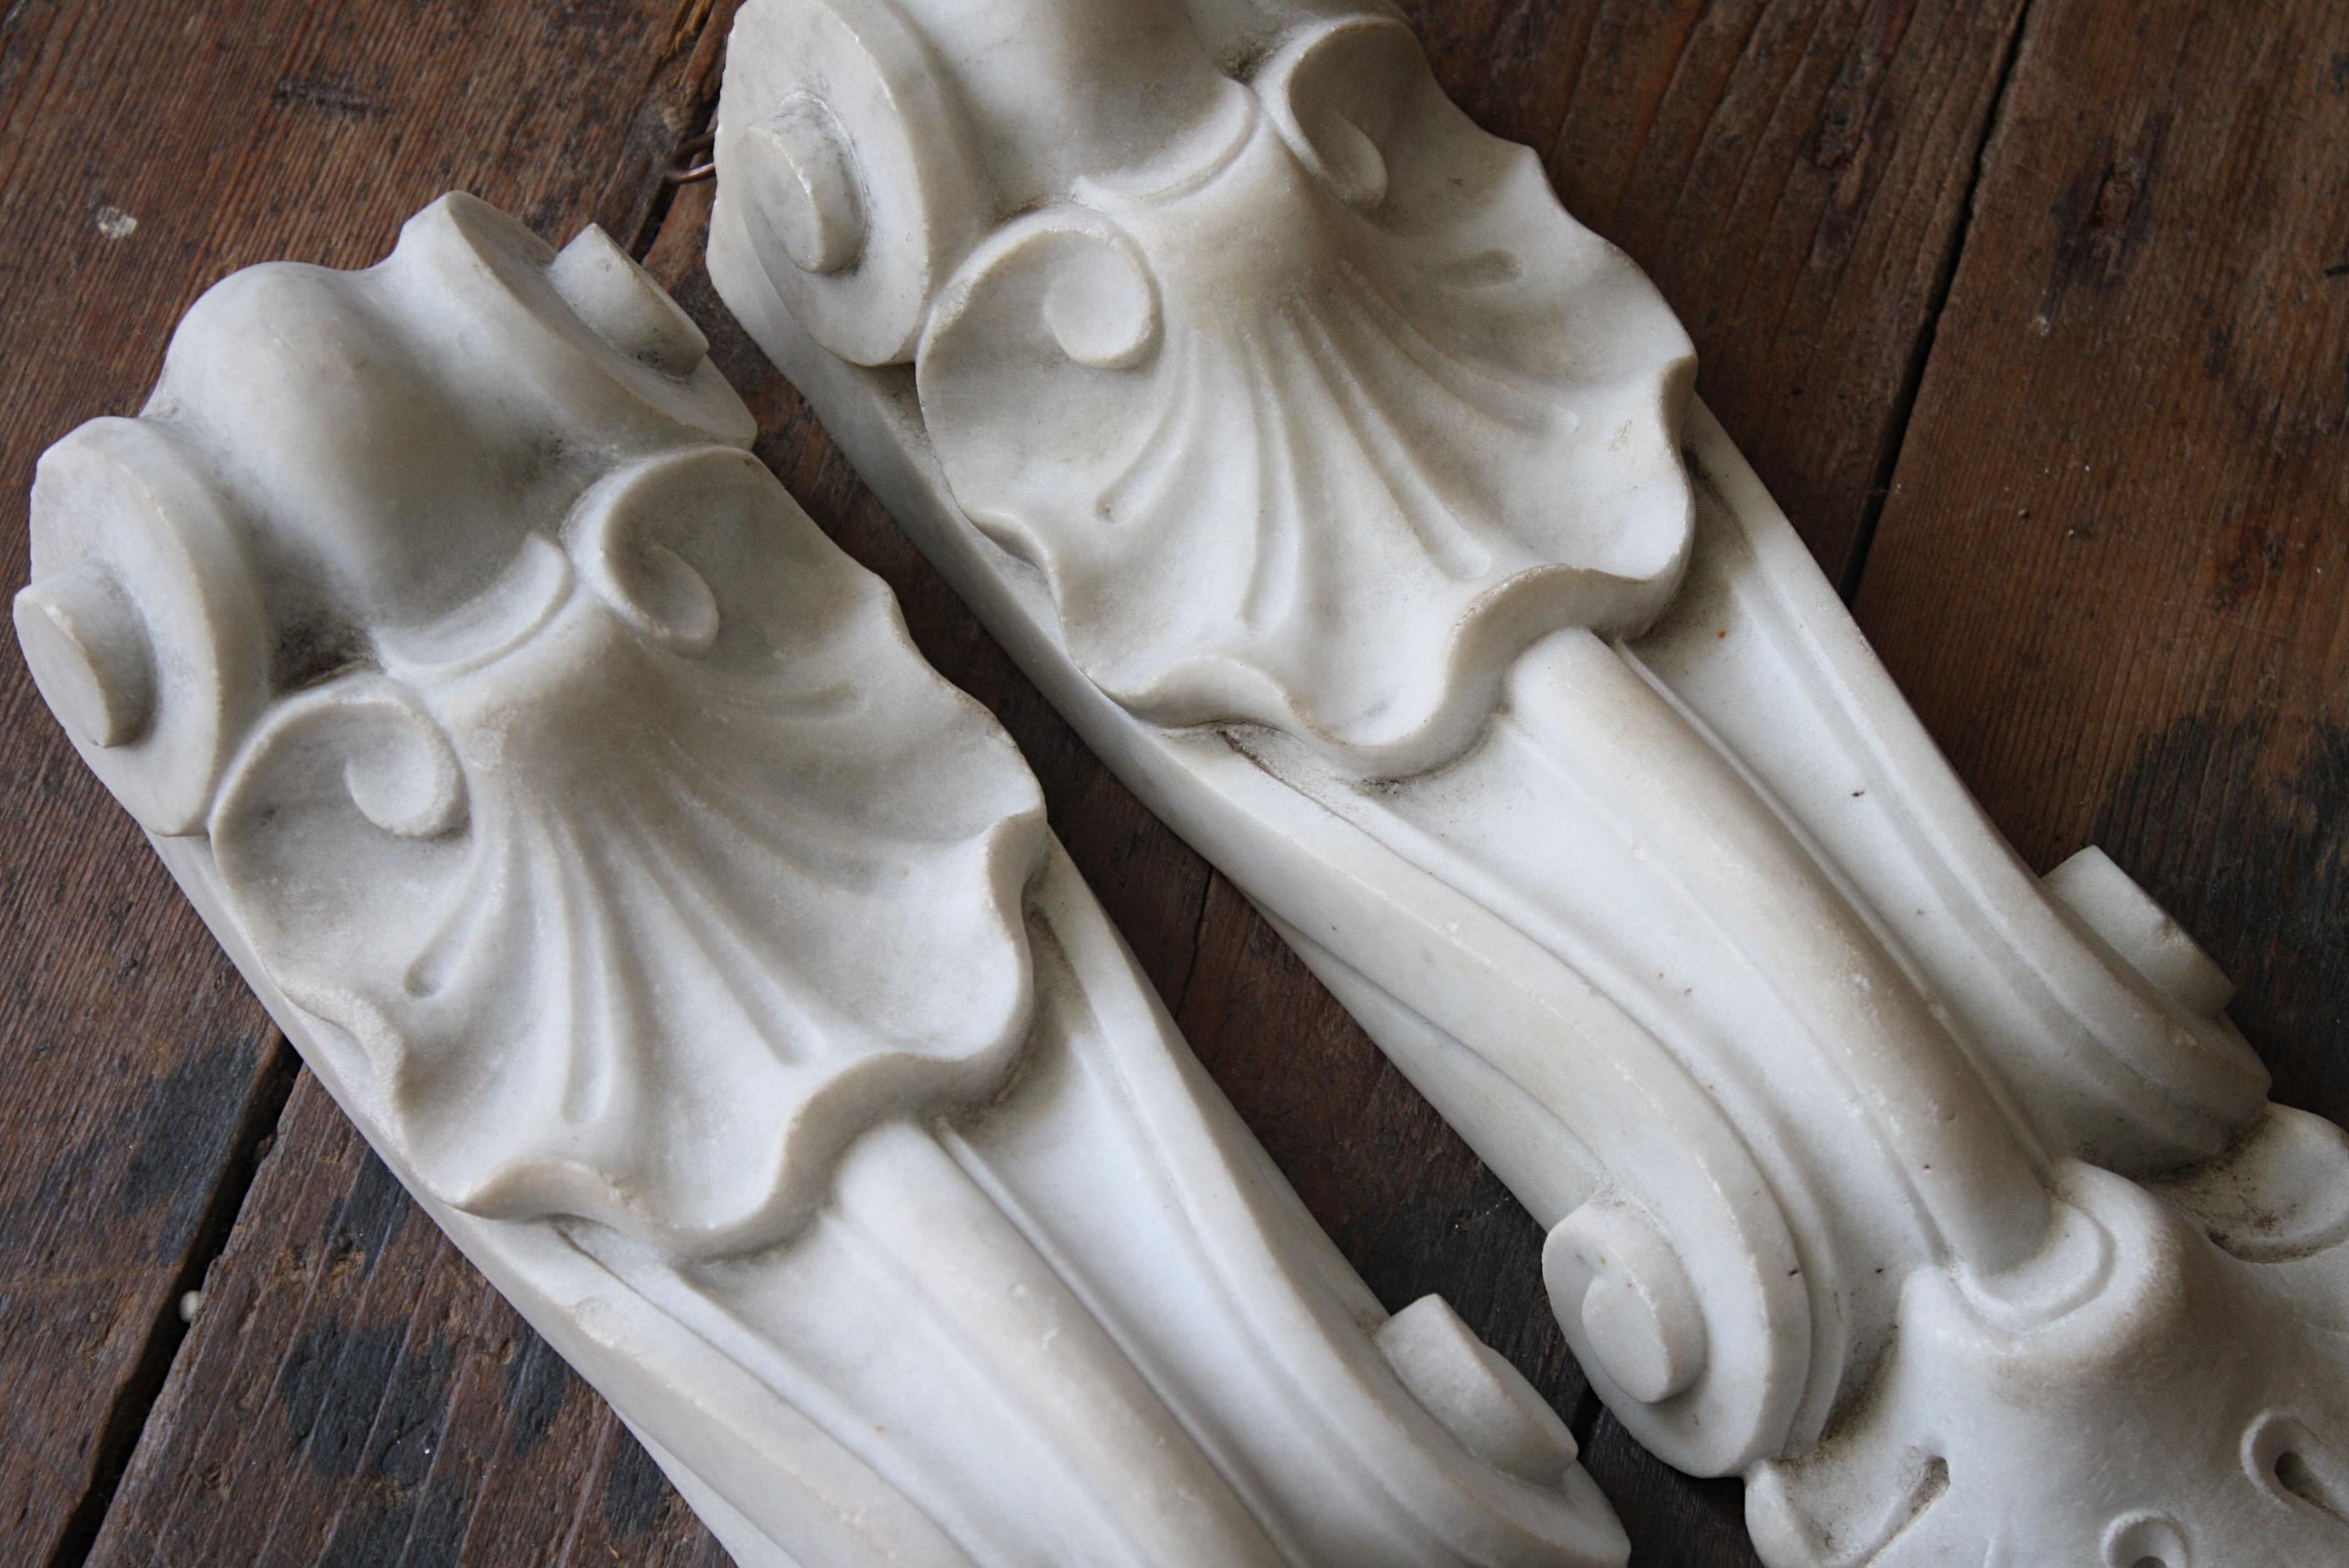 19th Century 19th C Carved Pair of Marble Decorative Architectural Corbel Elements 